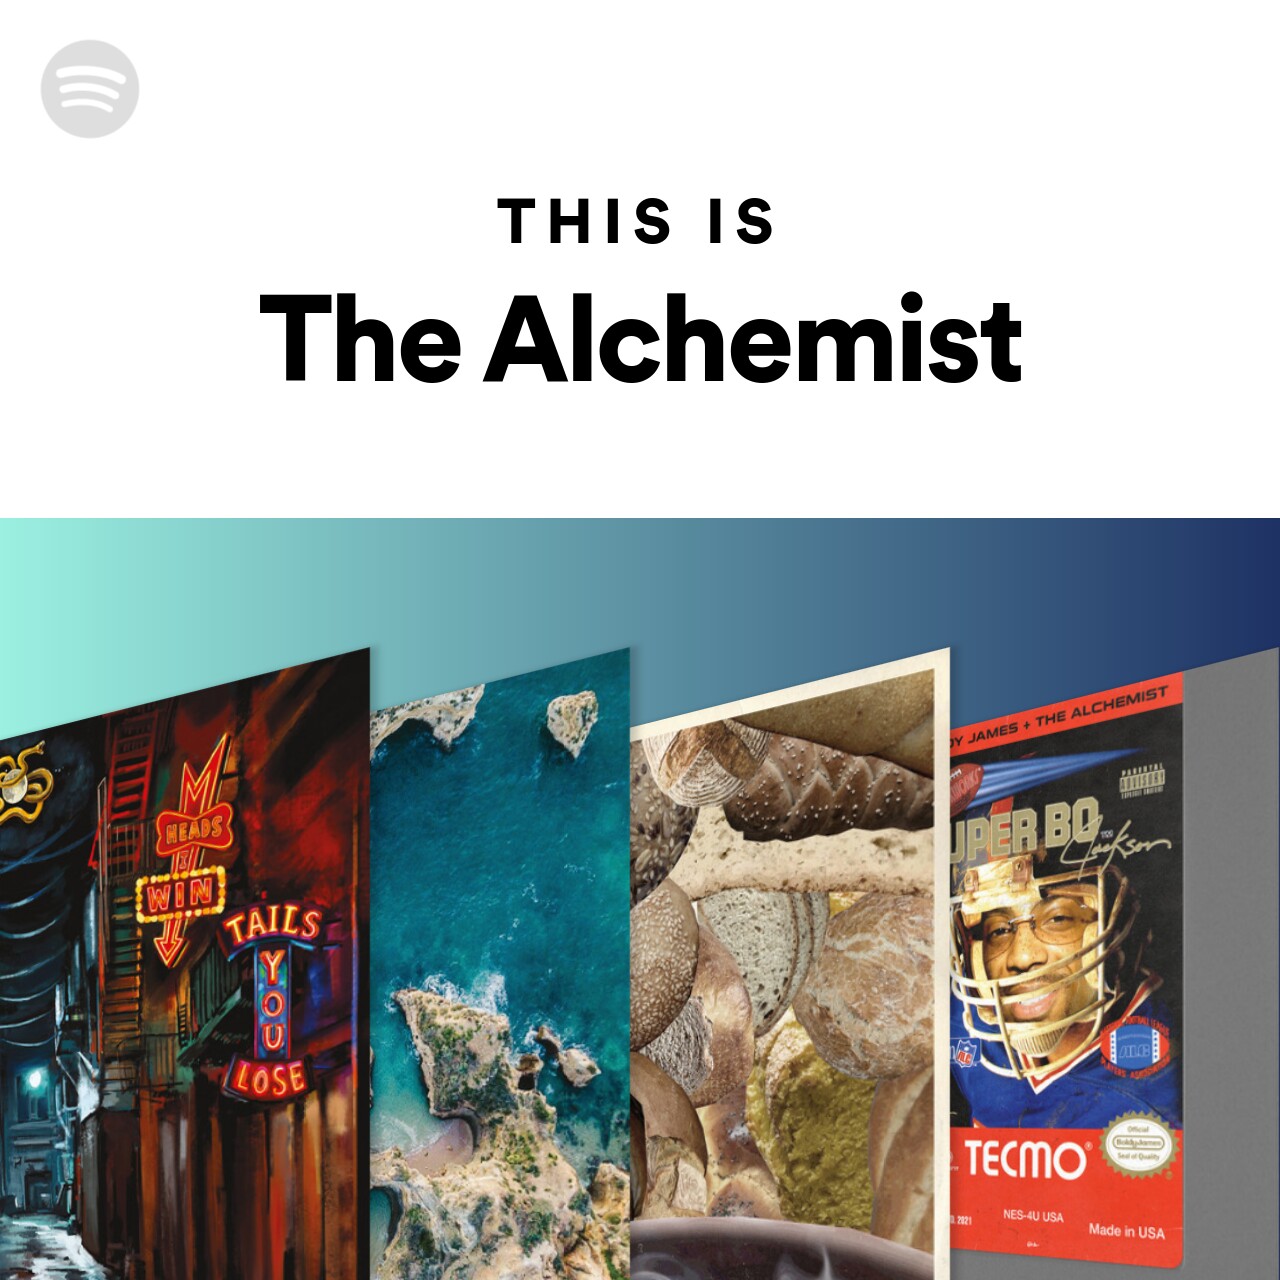 This Is The Alchemist